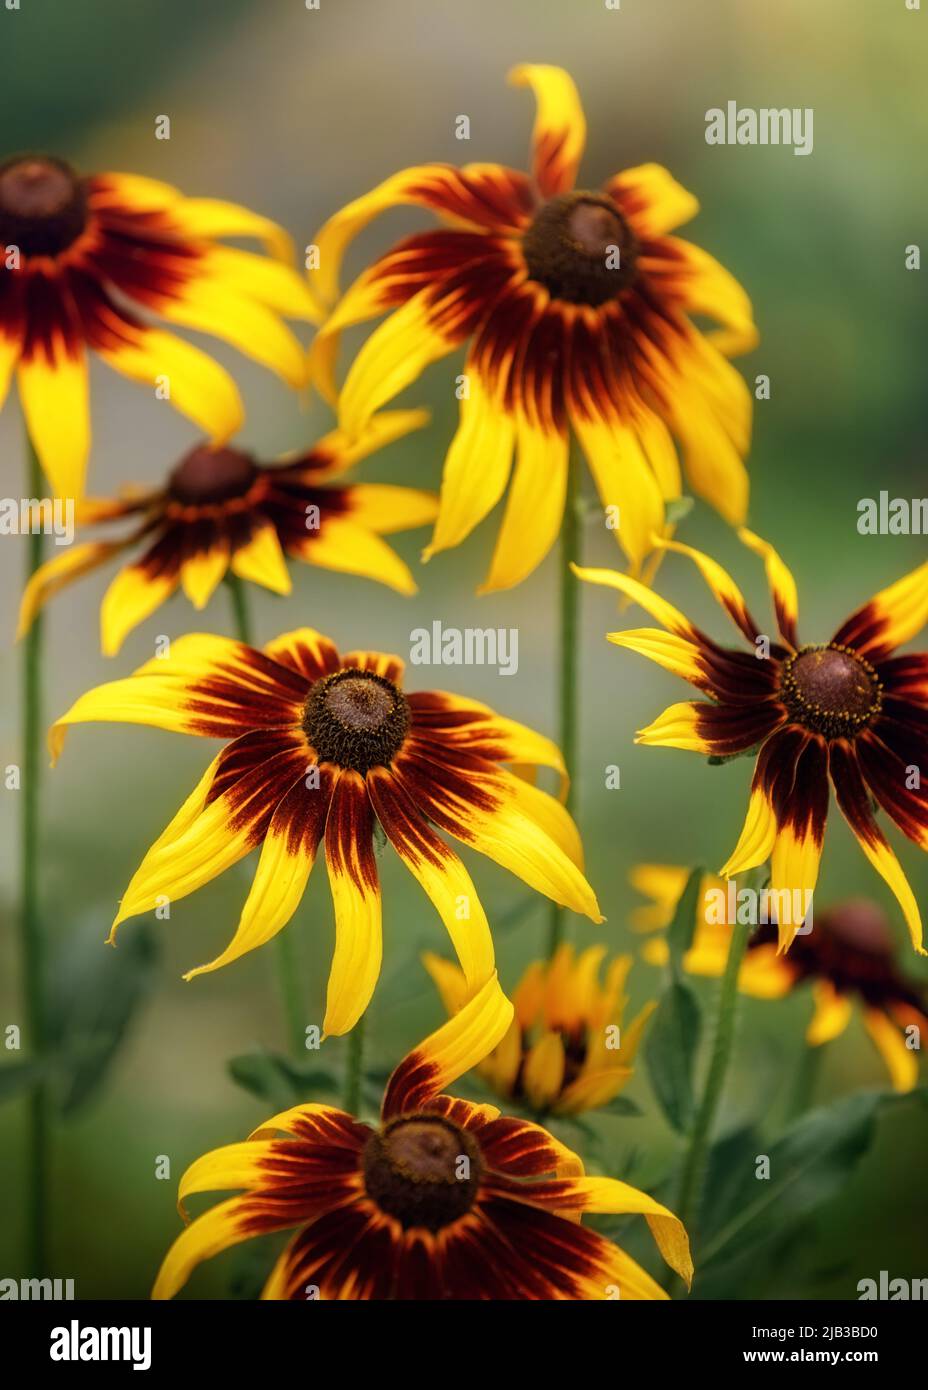 Floral background with bright yellow daisies on natural background. Rudbeckia in the garden. Yellow-brown flowers with outstanding seed at the center Stock Photo